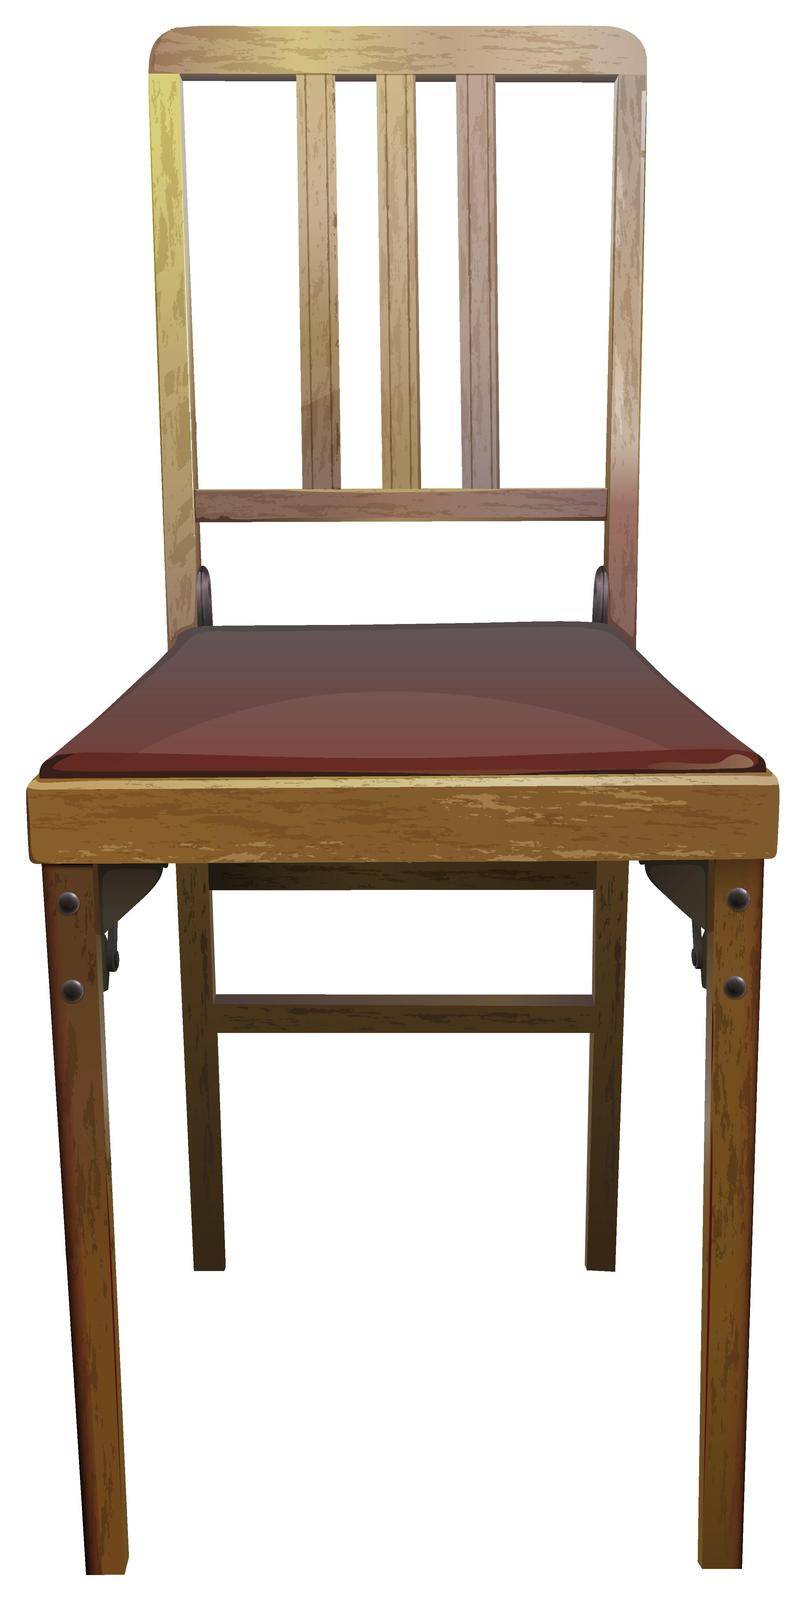 Illustration of a close up wooden chair